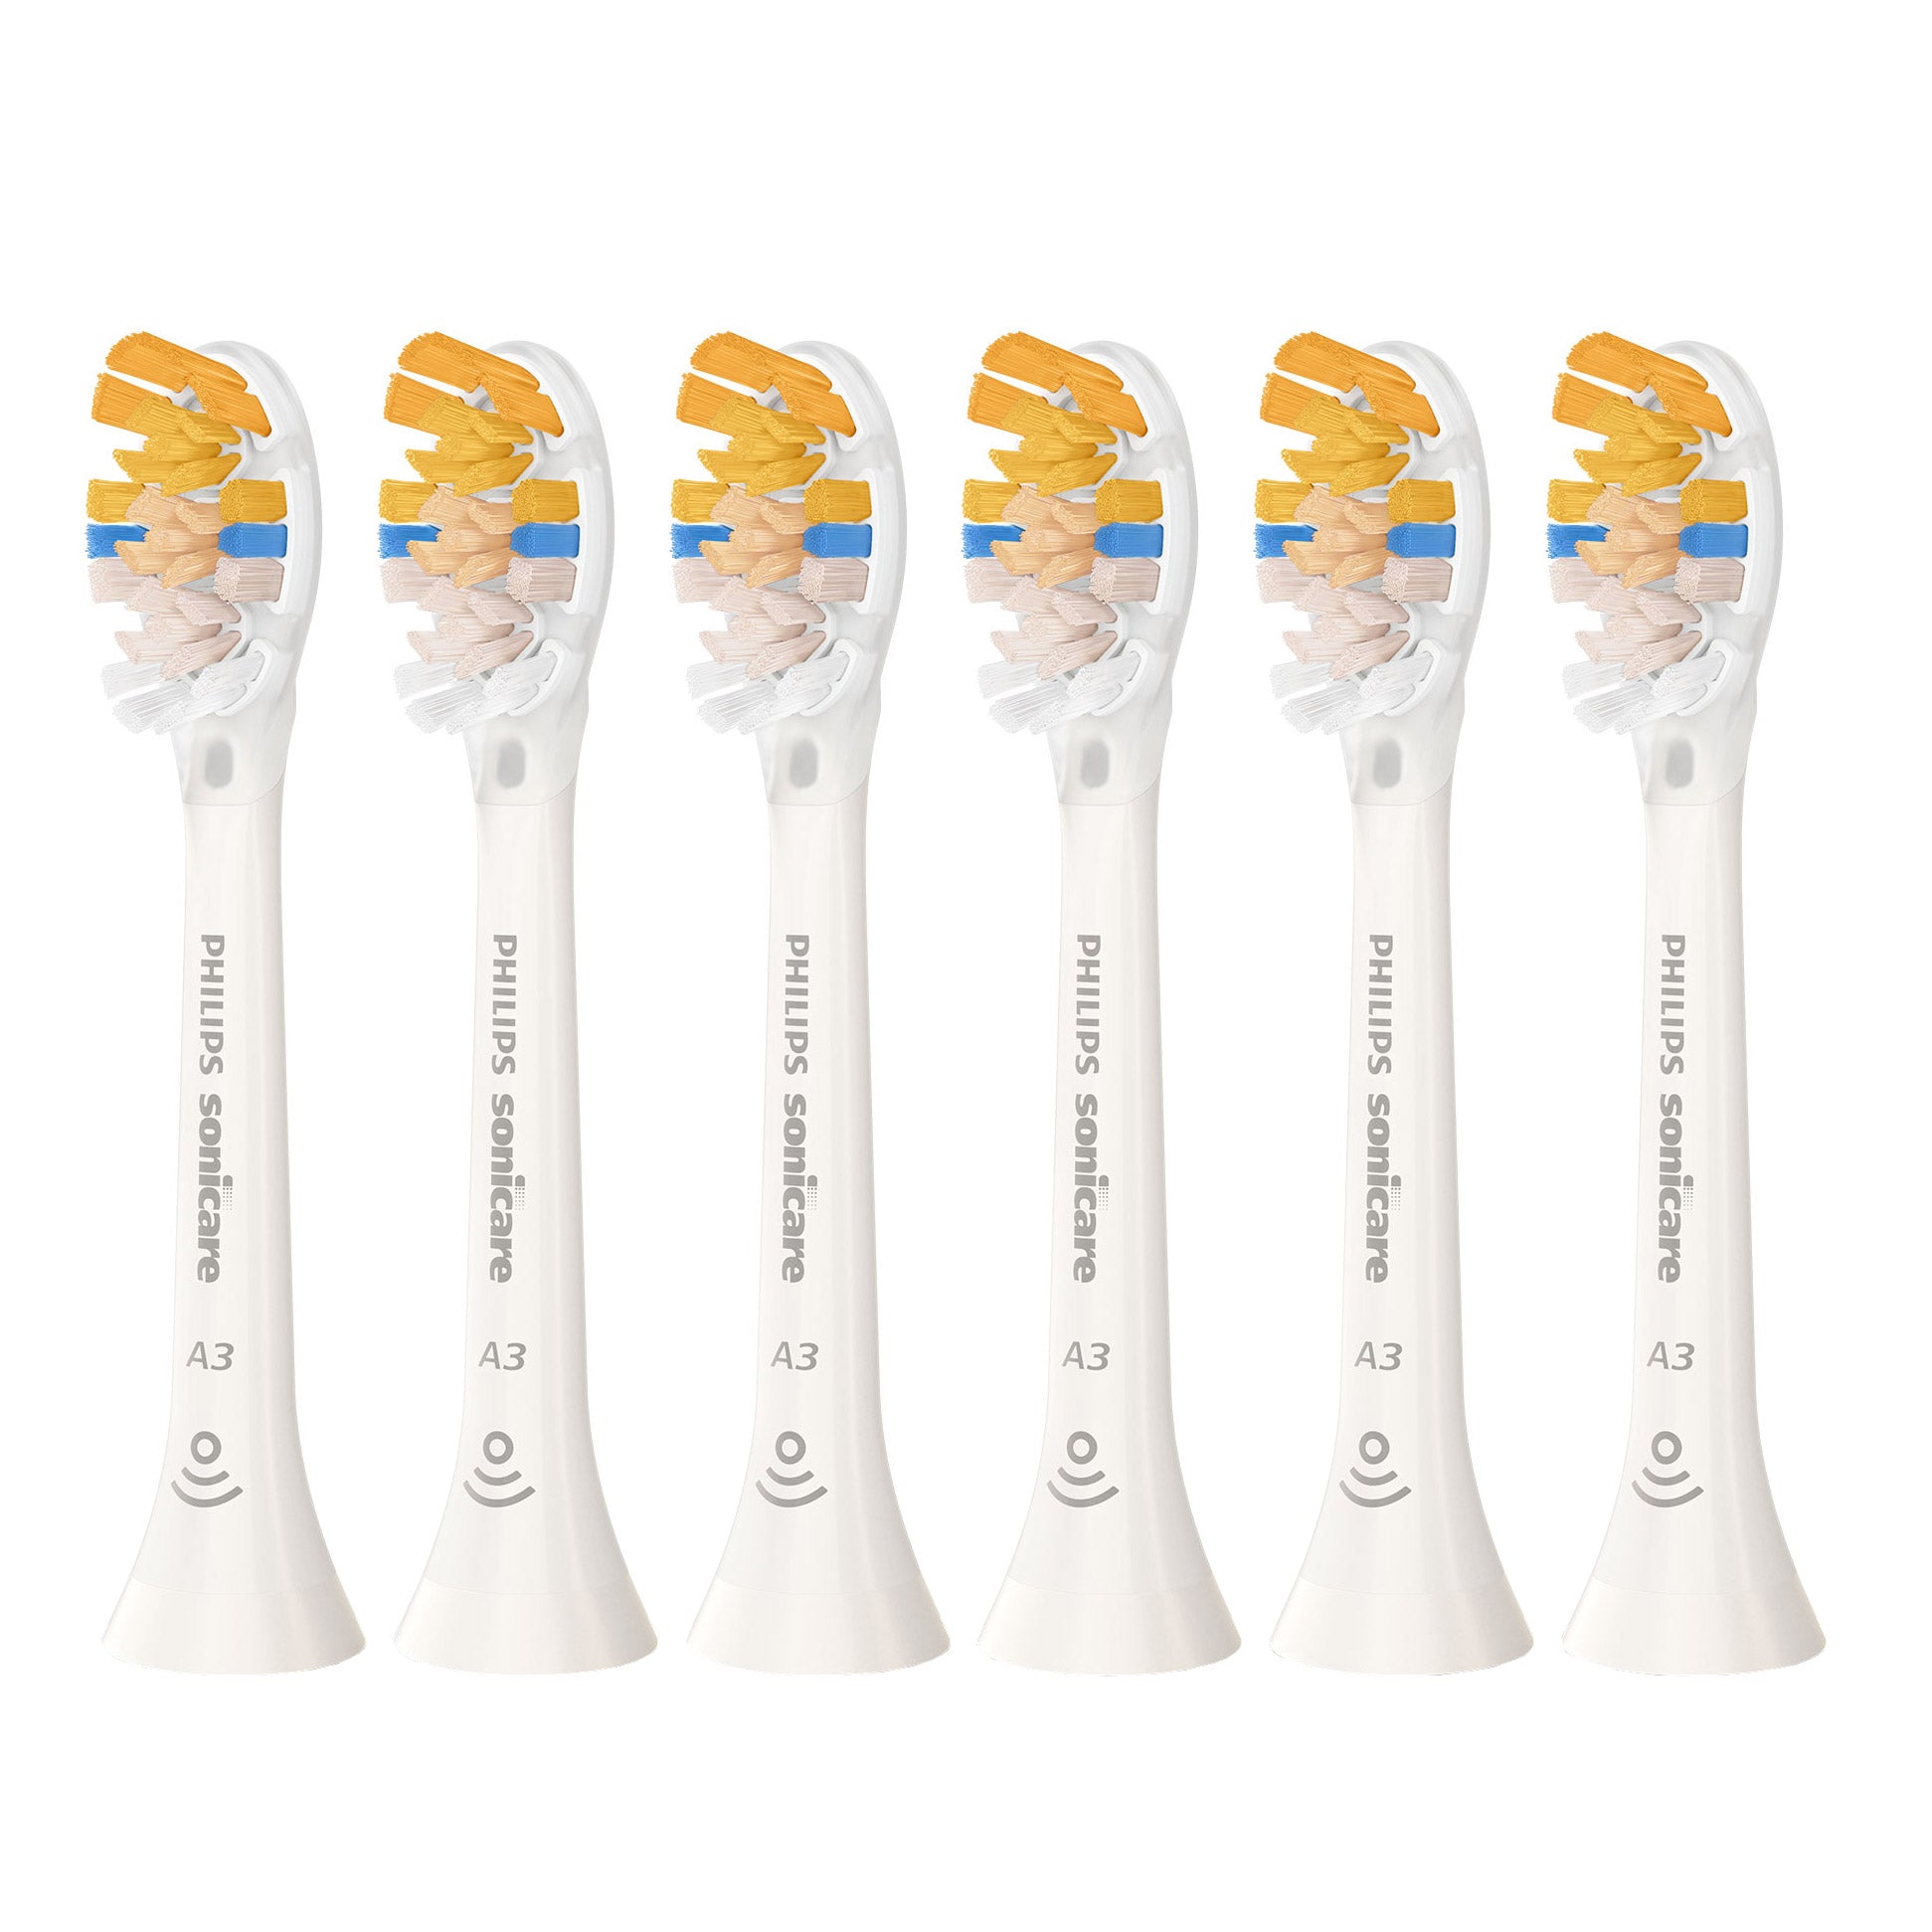 Philips Sonicare A3 All-In-One Brush Head, Pack of 6